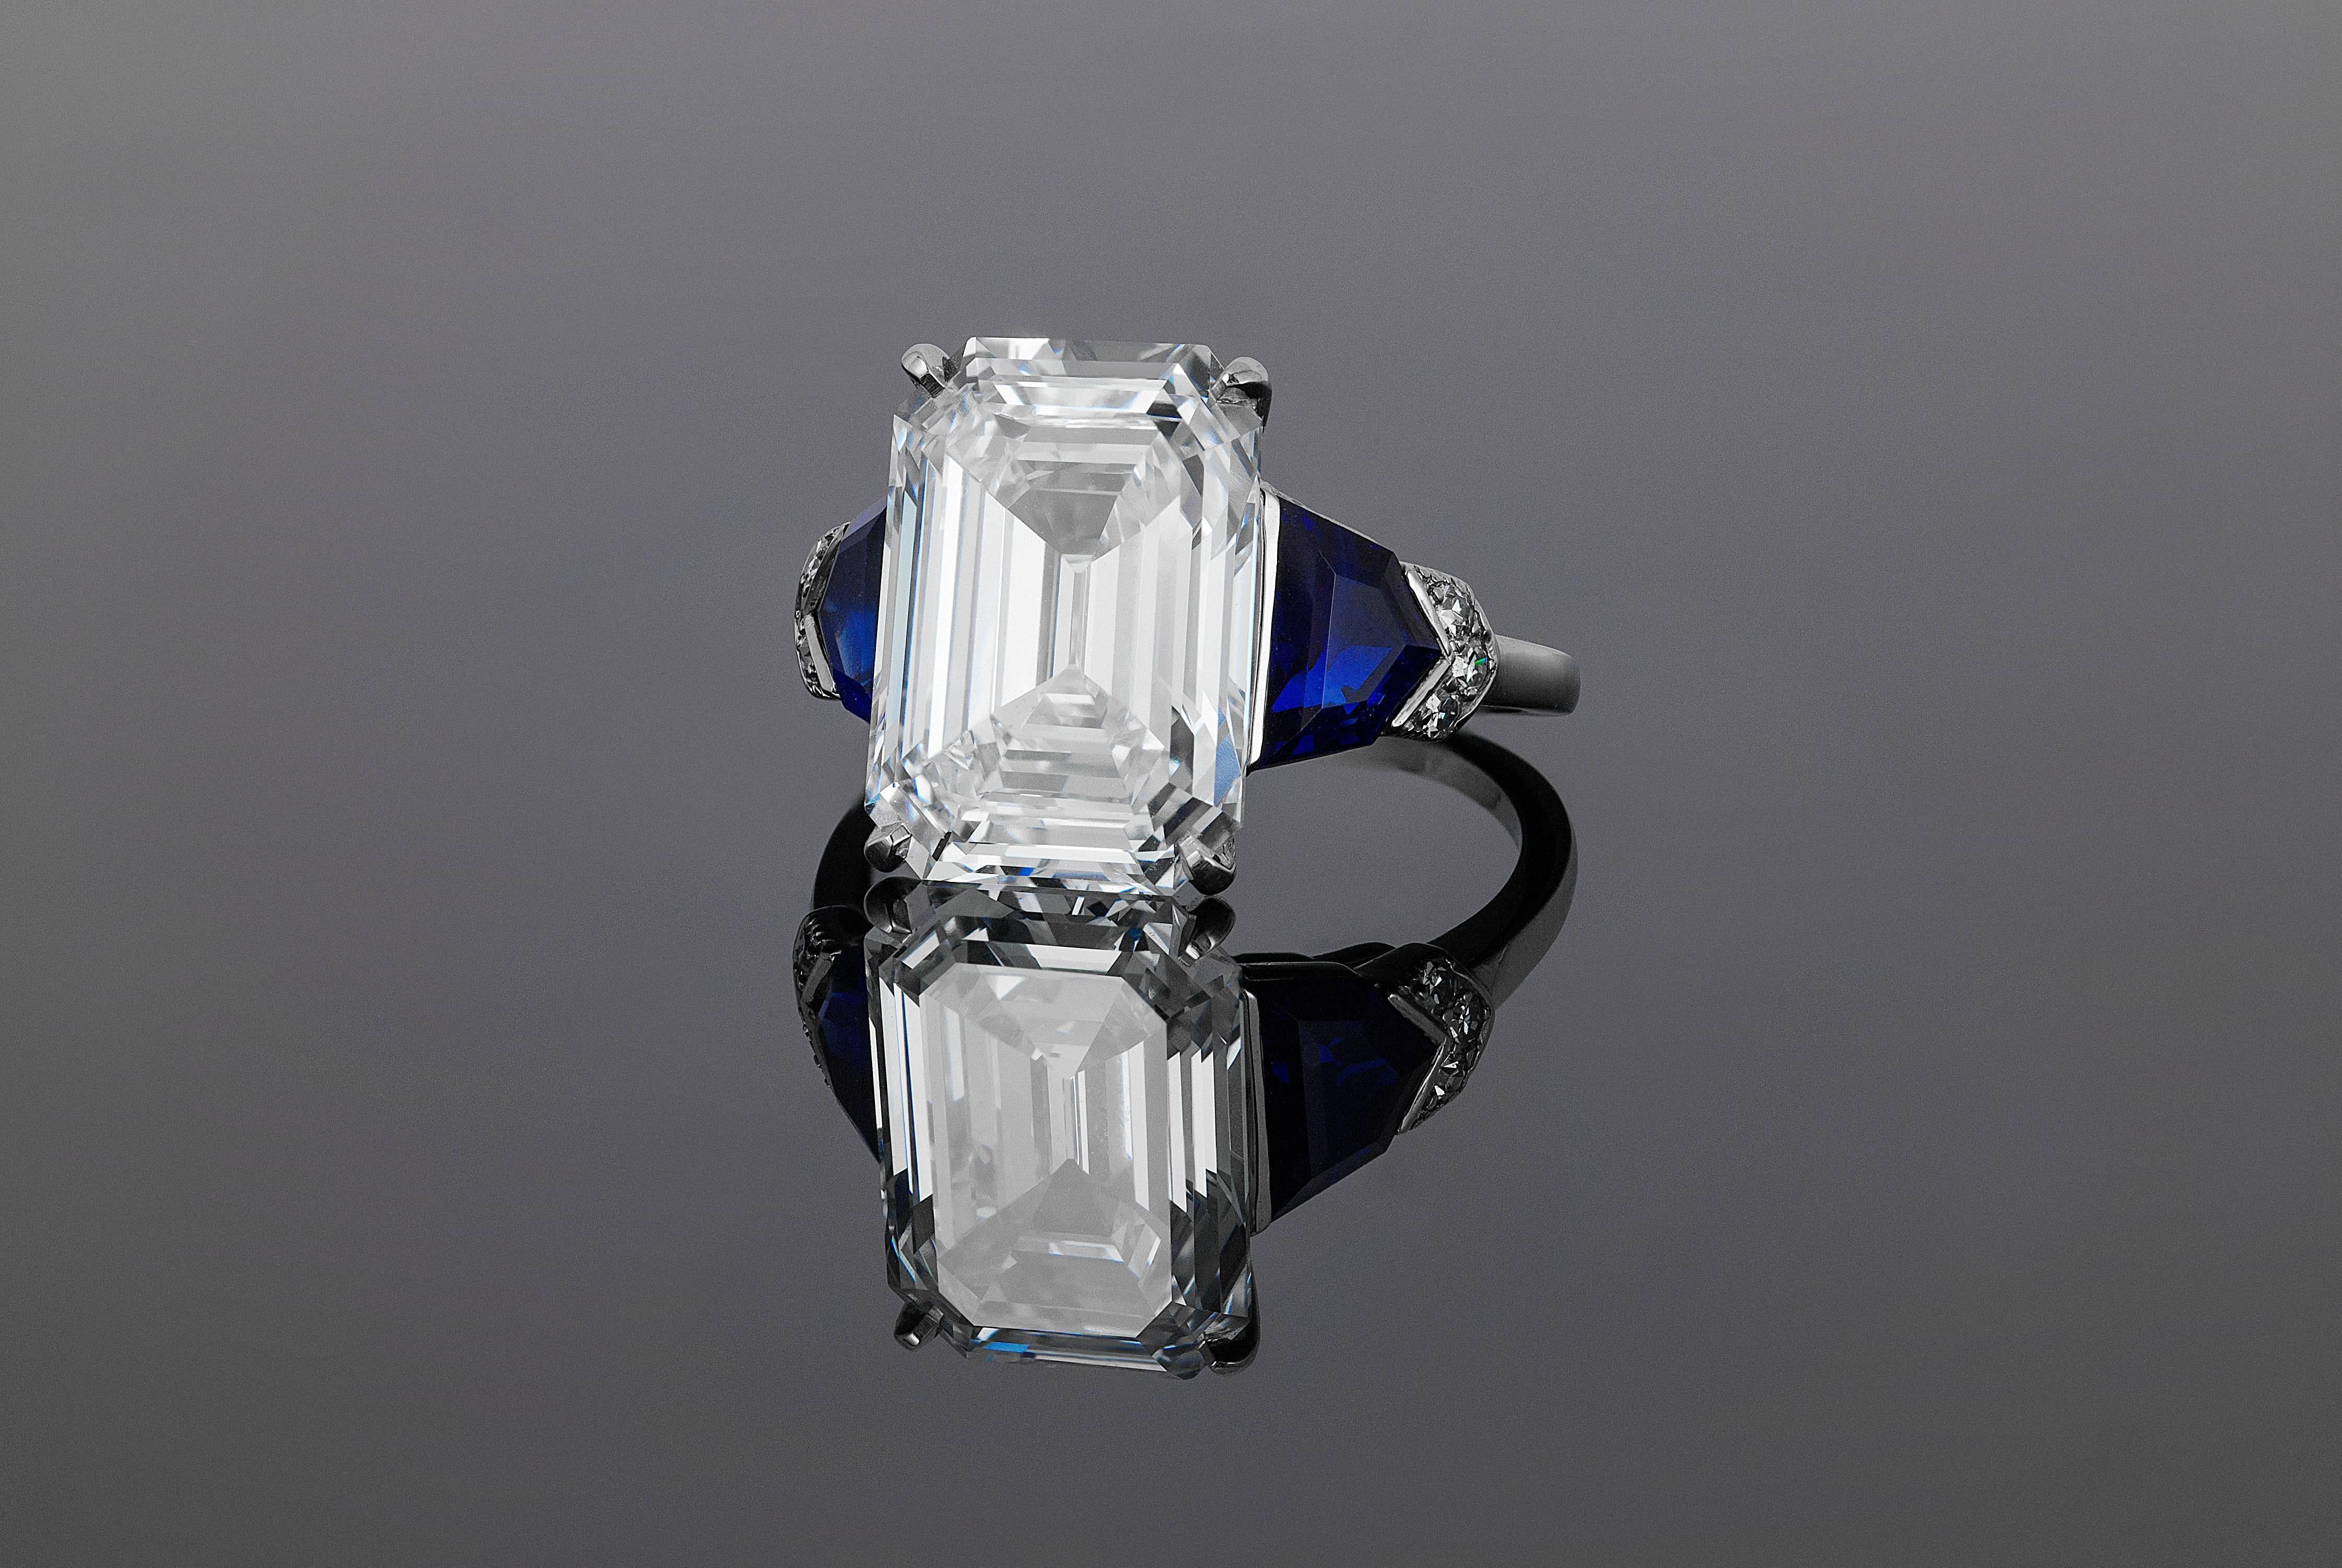 Featuring a beautiful emerald cut diamond weighing 6.23 carats and boasting F color, IF clarity, and classified as Type IIa, this ring by Raymond C. Yard is enhanced with shield shaped sapphires and a trim of diamonds.

COMMENTS
Most famous for